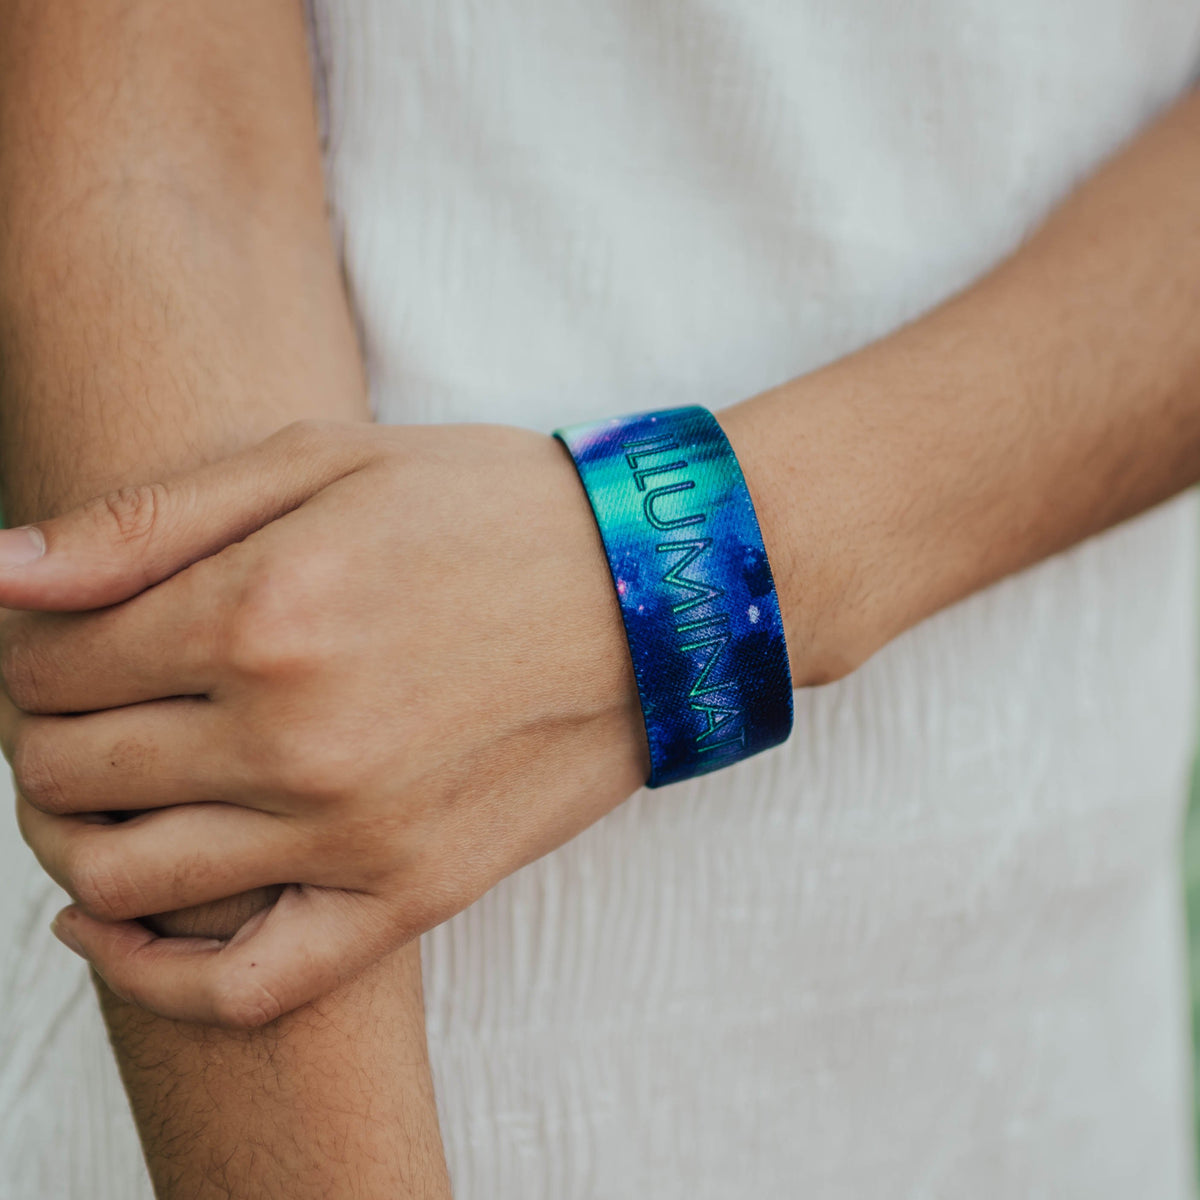 Illumination-Sold Out-ZOX - This item is sold out and will not be restocked.